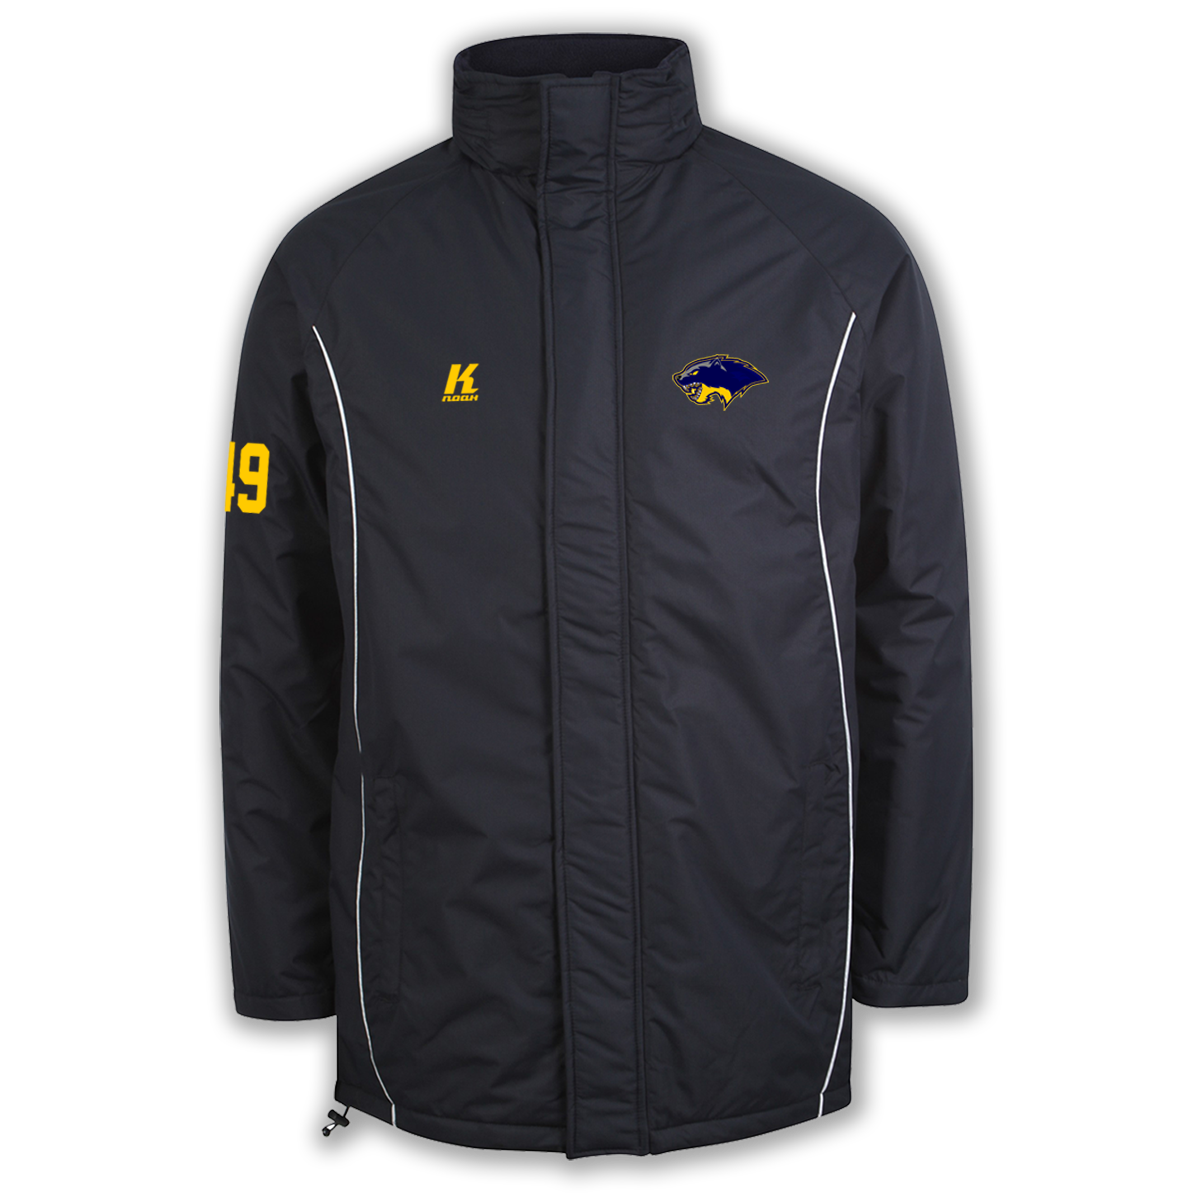 Wolverines Stadium Jacket with Playernumber/Initials